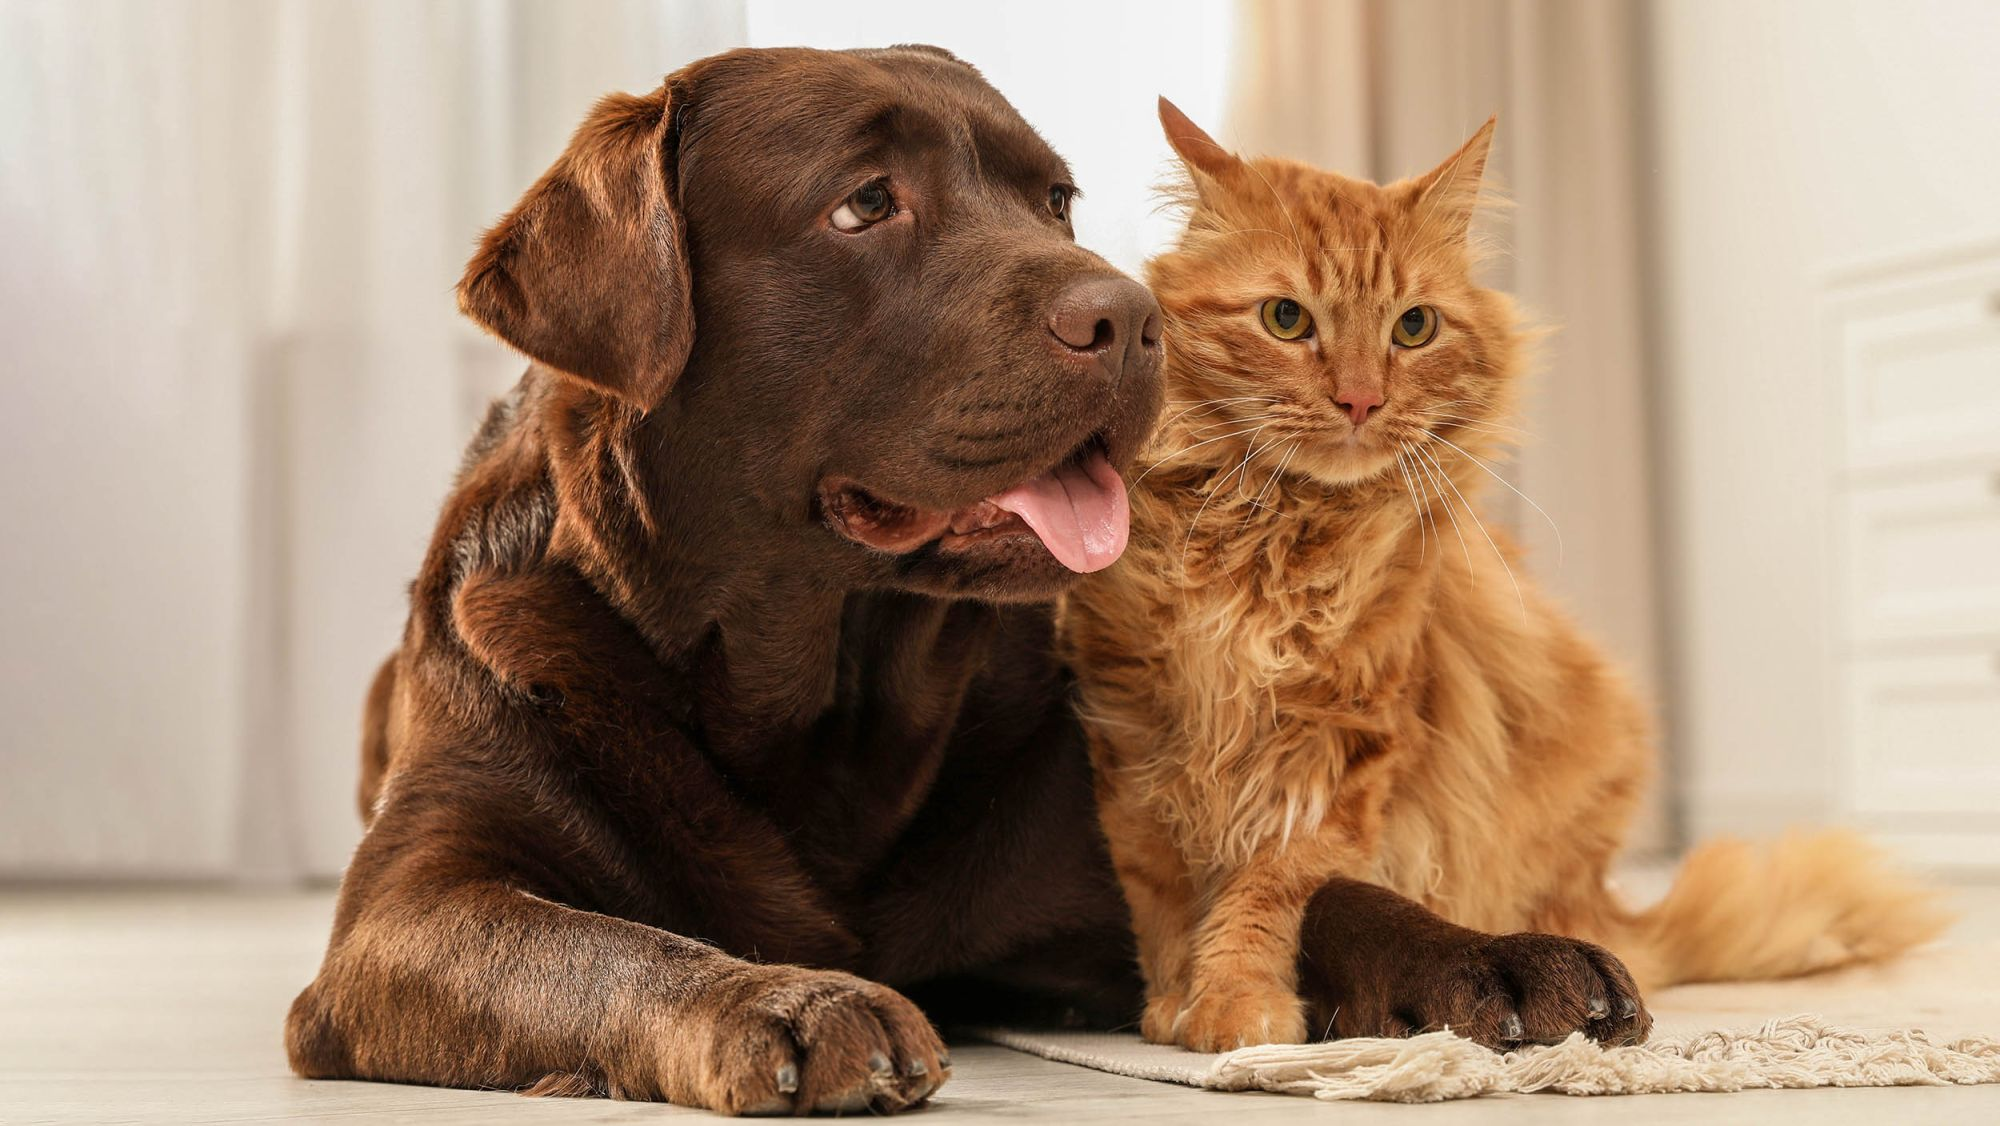 Brown Labrador retriever adult and ginger cat sitting together indoors